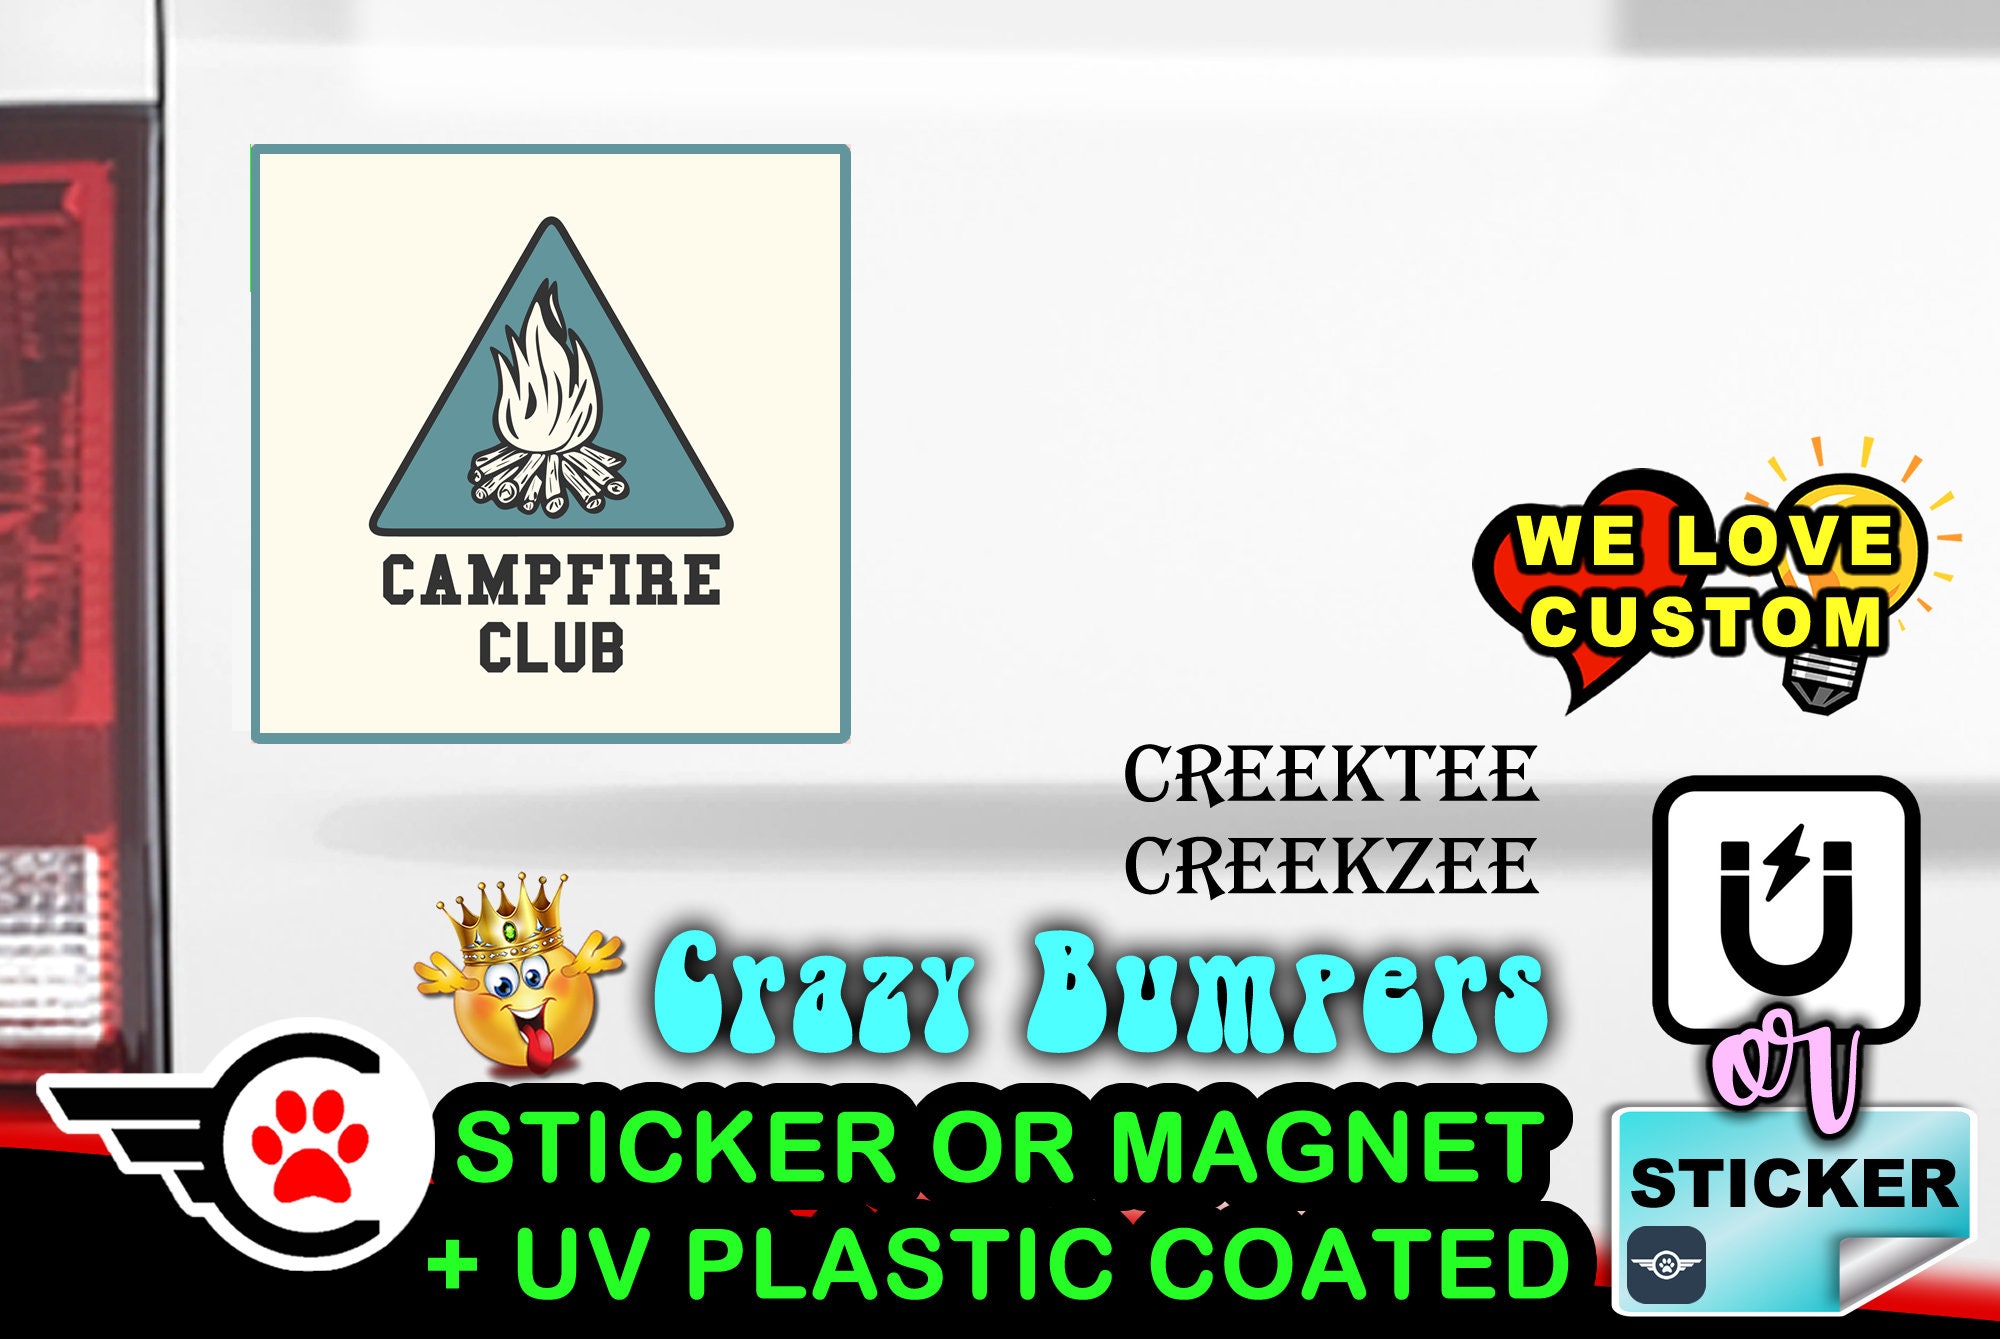 Campfire Club Bumper Sticker or Magnet in various sizes Hiqh Quality UV Laminate Coating 2